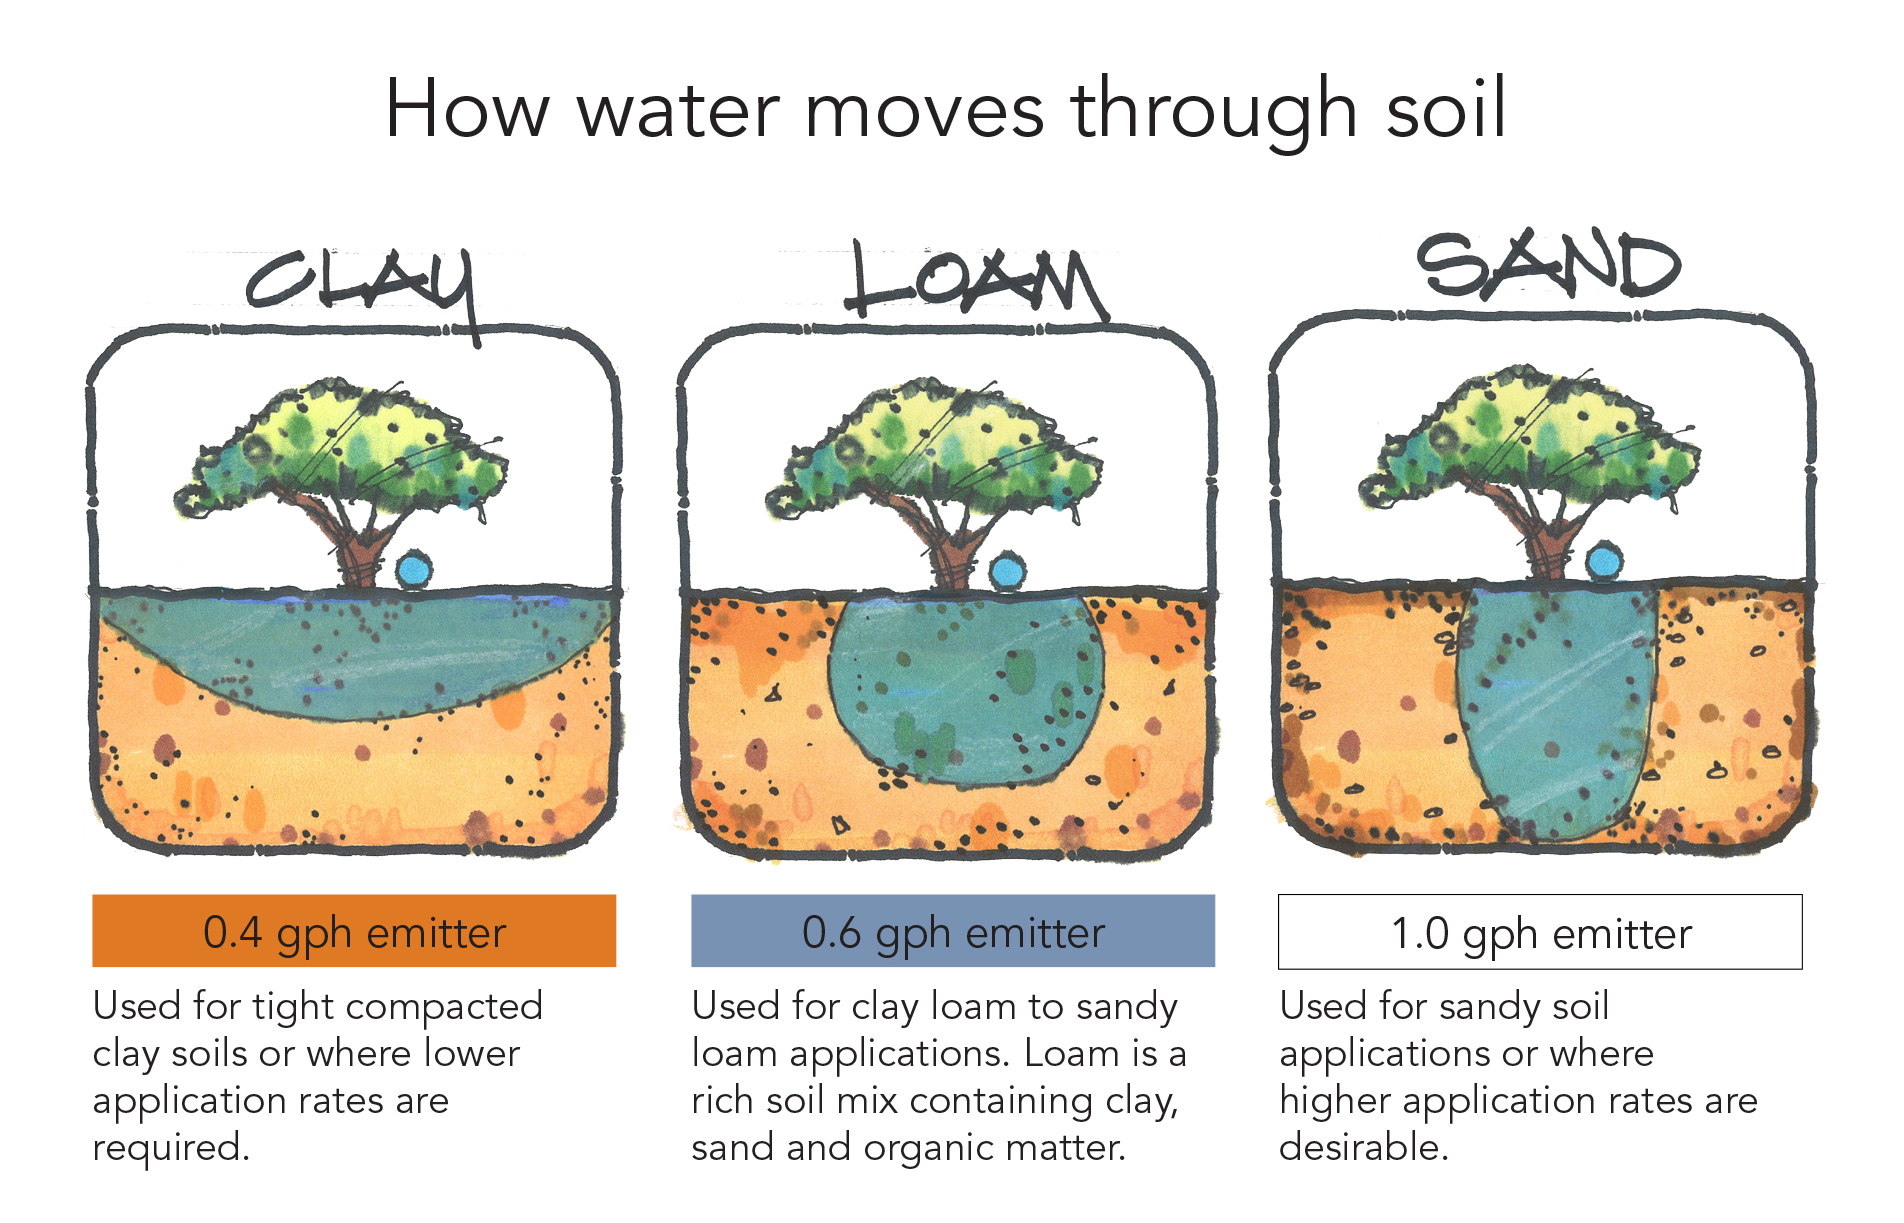 Why Use Drip Irrigation